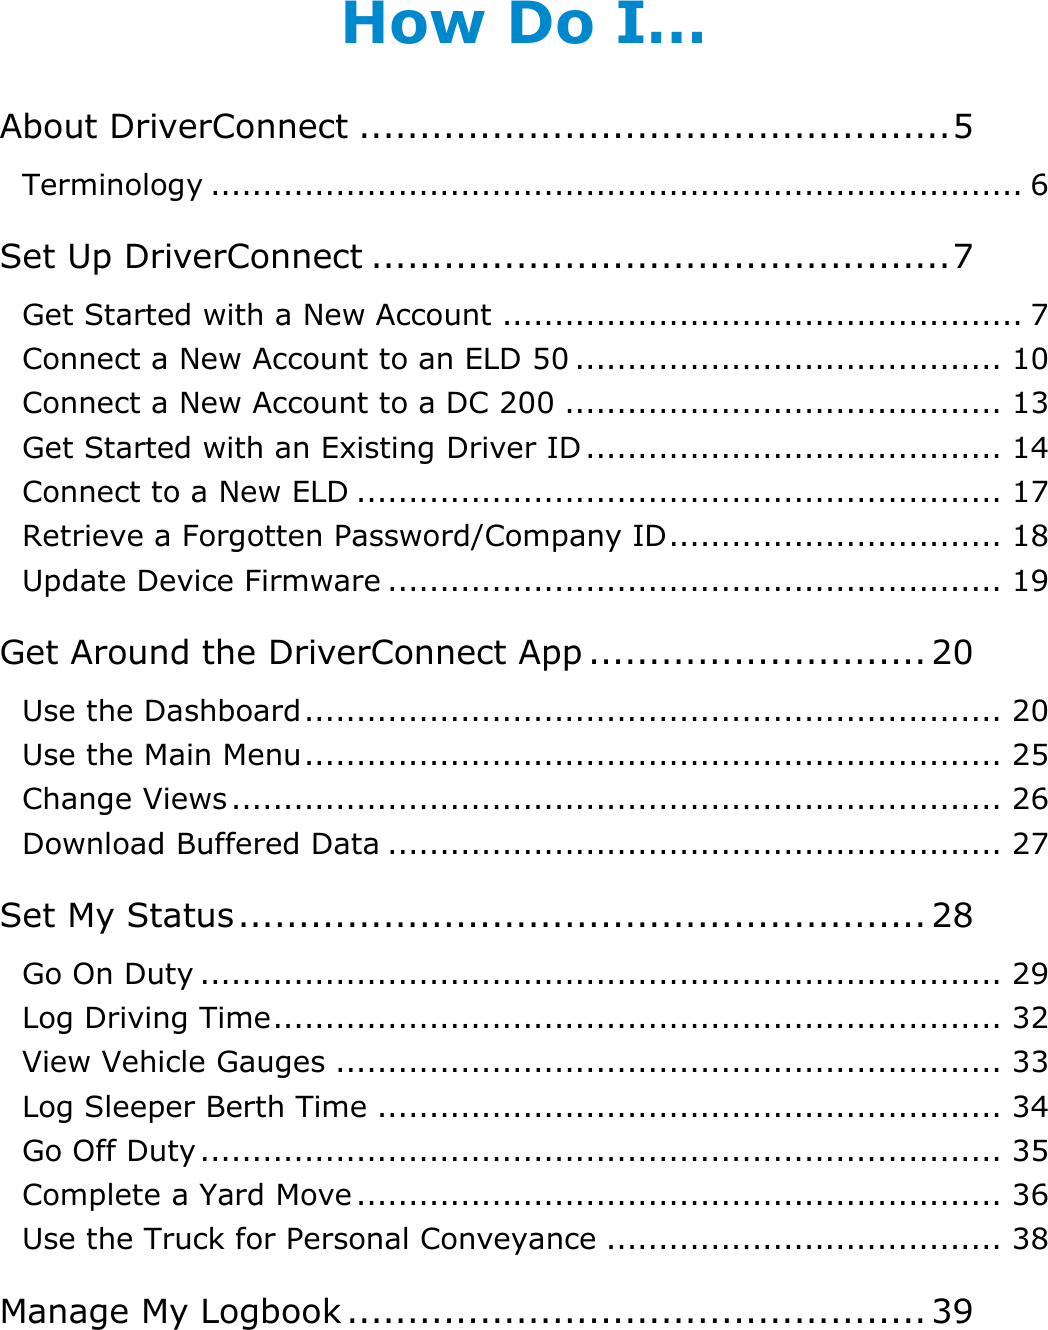 Table of Contents: How Do I…? DriverConnect User Guide  2 © 2016-2017, Rand McNally, Inc. How Do I… About DriverConnect ................................................. 5 Terminology .............................................................................. 6 Set Up DriverConnect ................................................ 7 Get Started with a New Account .................................................. 7 Connect a New Account to an ELD 50 ......................................... 10 Connect a New Account to a DC 200 .......................................... 13 Get Started with an Existing Driver ID ........................................ 14 Connect to a New ELD .............................................................. 17 Retrieve a Forgotten Password/Company ID ................................ 18 Update Device Firmware ........................................................... 19 Get Around the DriverConnect App ............................ 20 Use the Dashboard ................................................................... 20 Use the Main Menu ................................................................... 25 Change Views .......................................................................... 26 Download Buffered Data ........................................................... 27 Set My Status ......................................................... 28 Go On Duty ............................................................................. 29 Log Driving Time ...................................................................... 32 View Vehicle Gauges ................................................................ 33 Log Sleeper Berth Time ............................................................ 34 Go Off Duty ............................................................................. 35 Complete a Yard Move .............................................................. 36 Use the Truck for Personal Conveyance ...................................... 38 Manage My Logbook ................................................ 39 